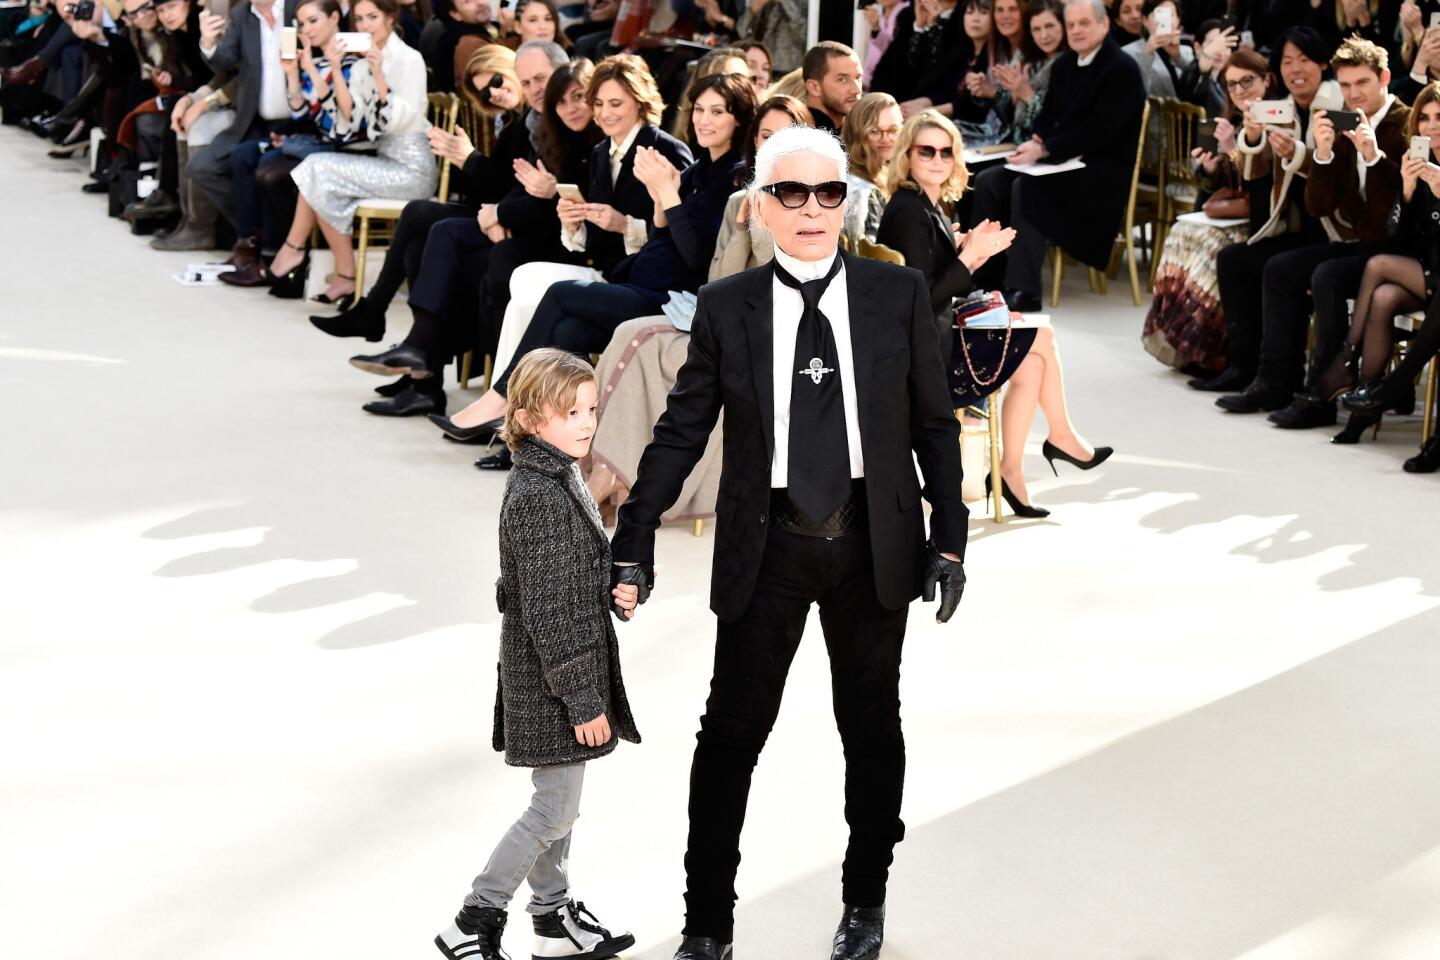 Remembering Karl Lagerfeld on the first anniversary of his death